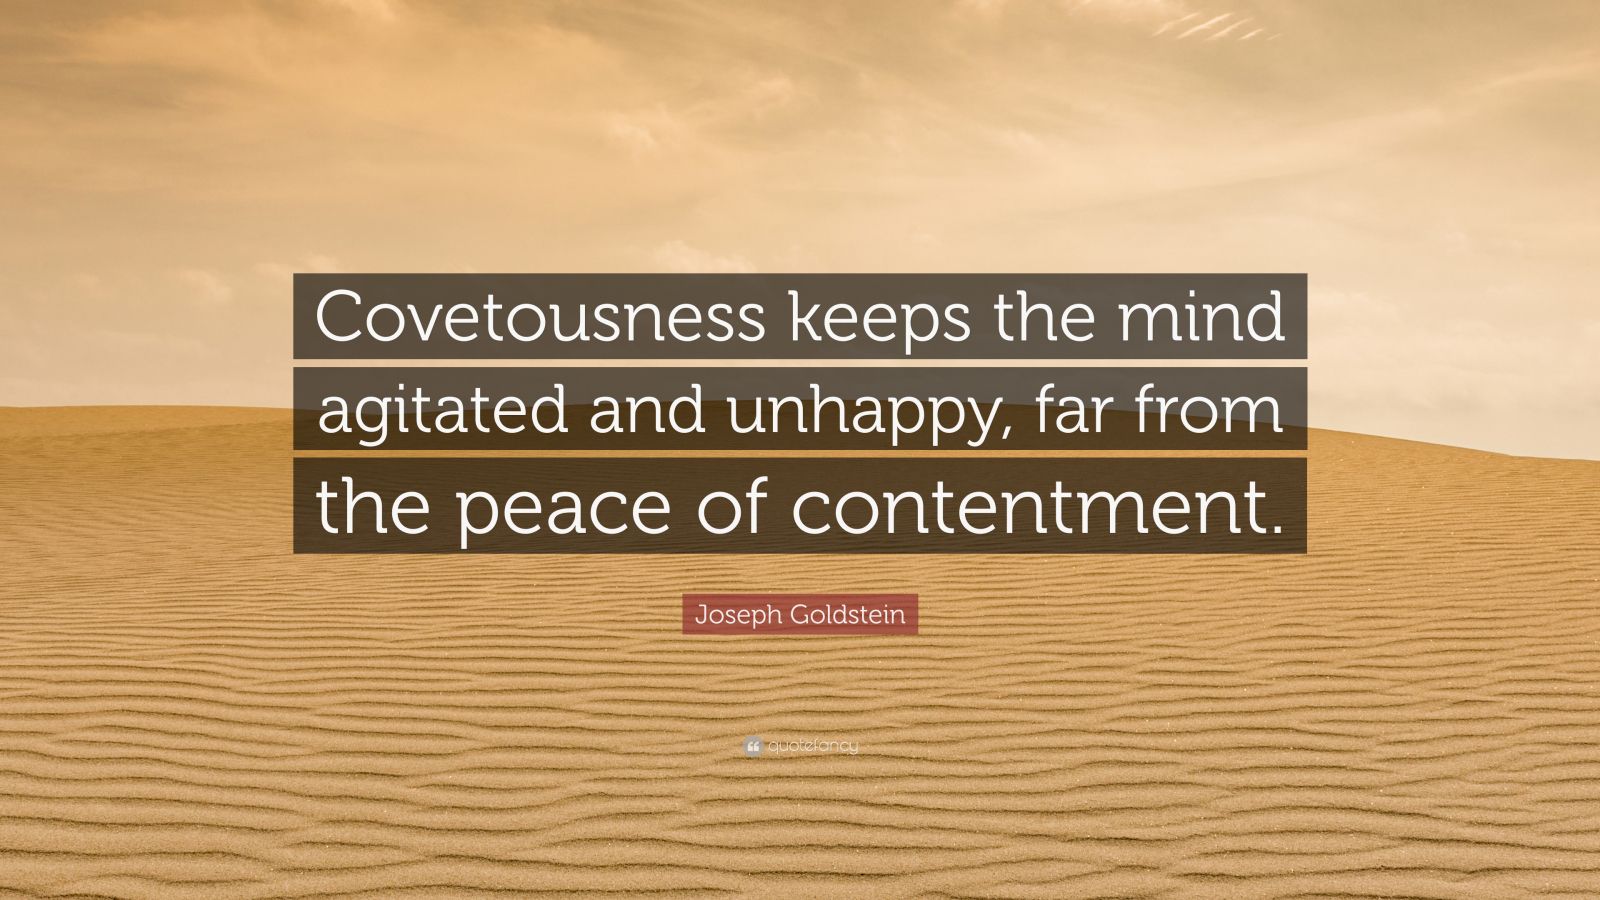 Joseph Goldstein Quote: “Covetousness keeps the mind agitated and ...